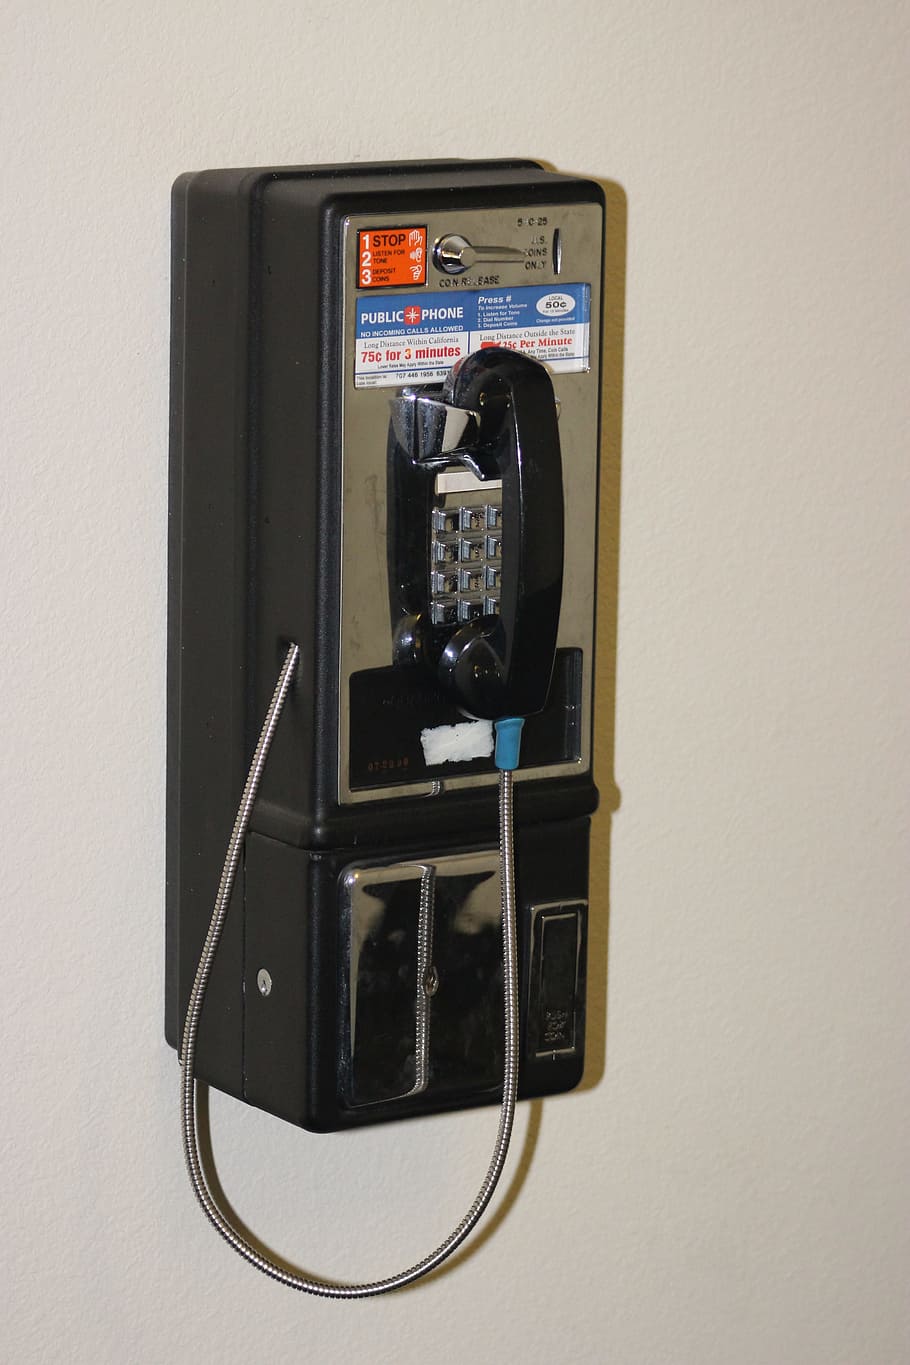 Payphone, Telephone, Public, Public, Phone, telephone, public, phone, communication, communicate, technology, pay